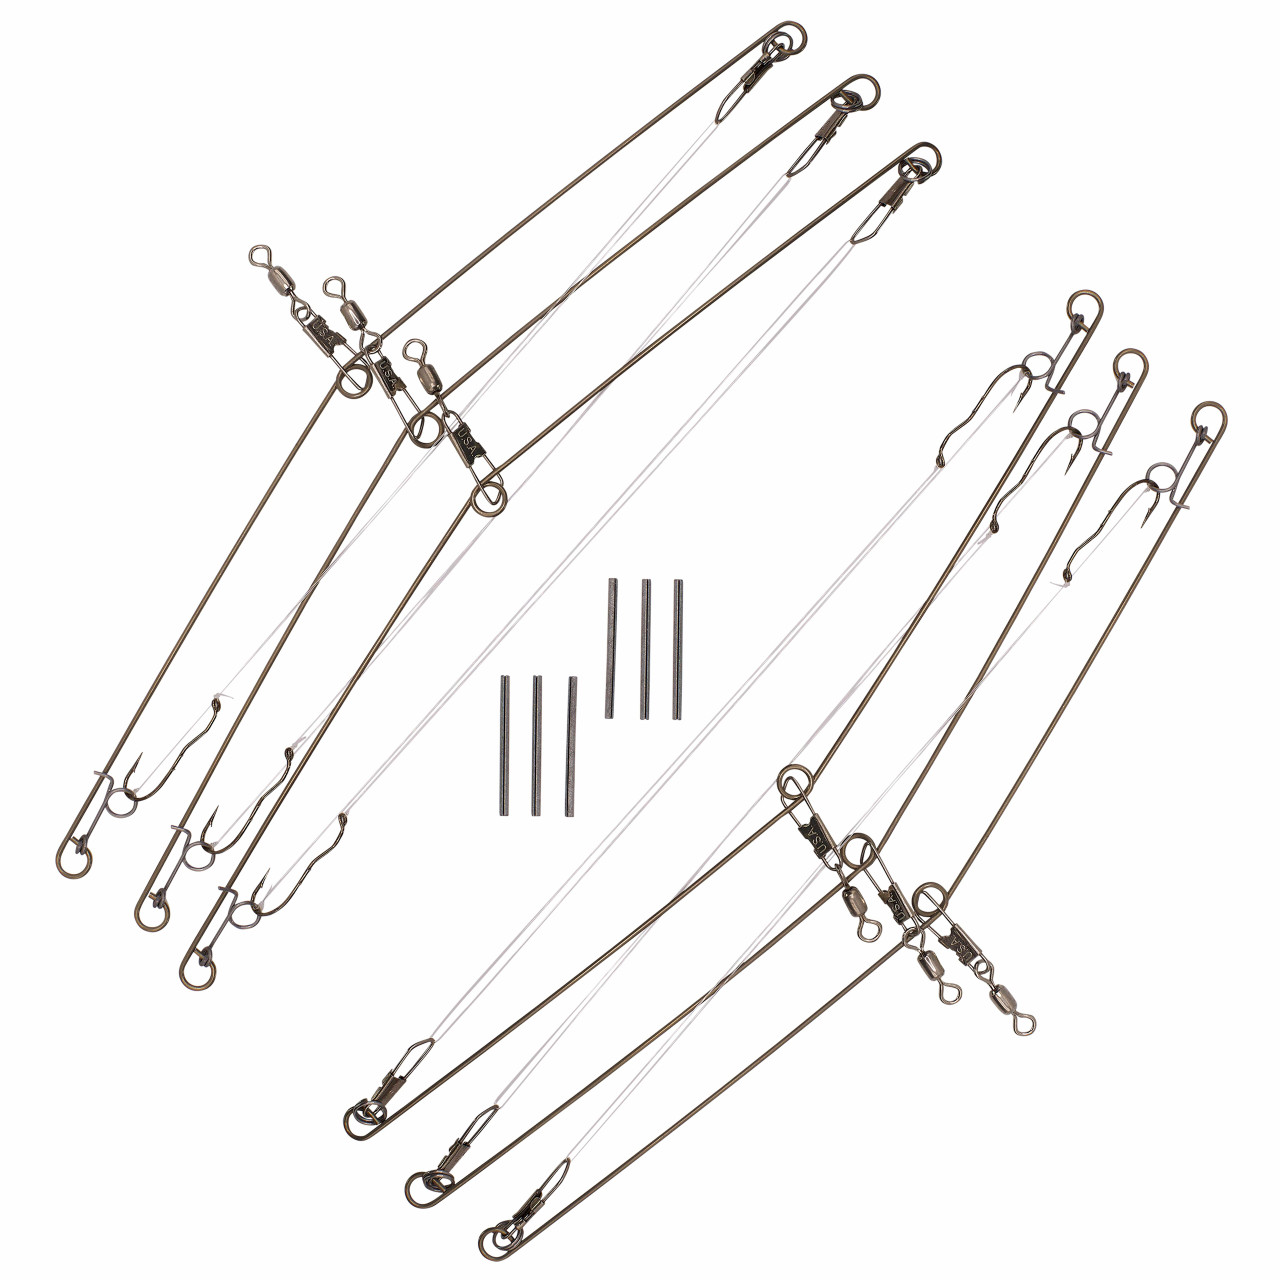 Speedhook 6 Pack sh006 34.95 $ physical All Products Speedhook New Speedhook